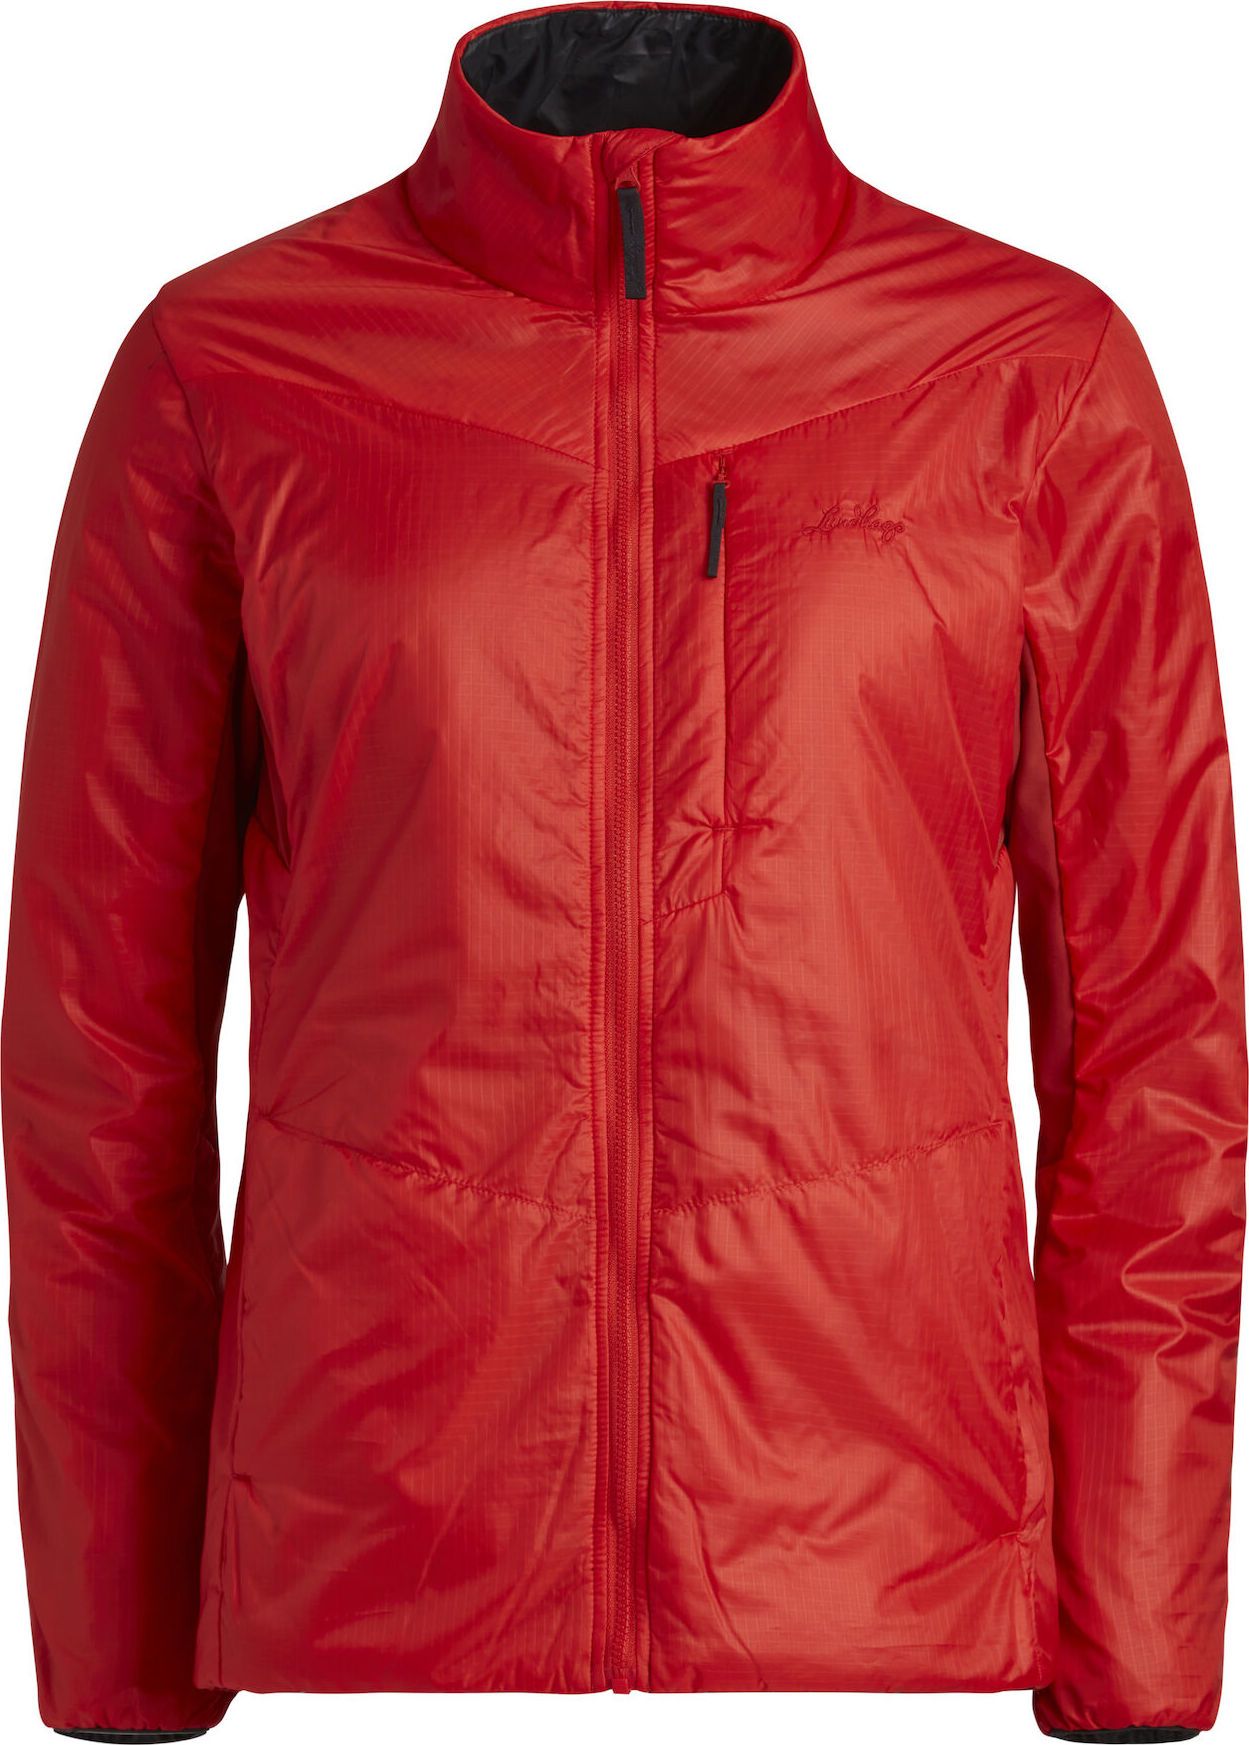 Lundhags Women's Idu Light Jacket Lively Red